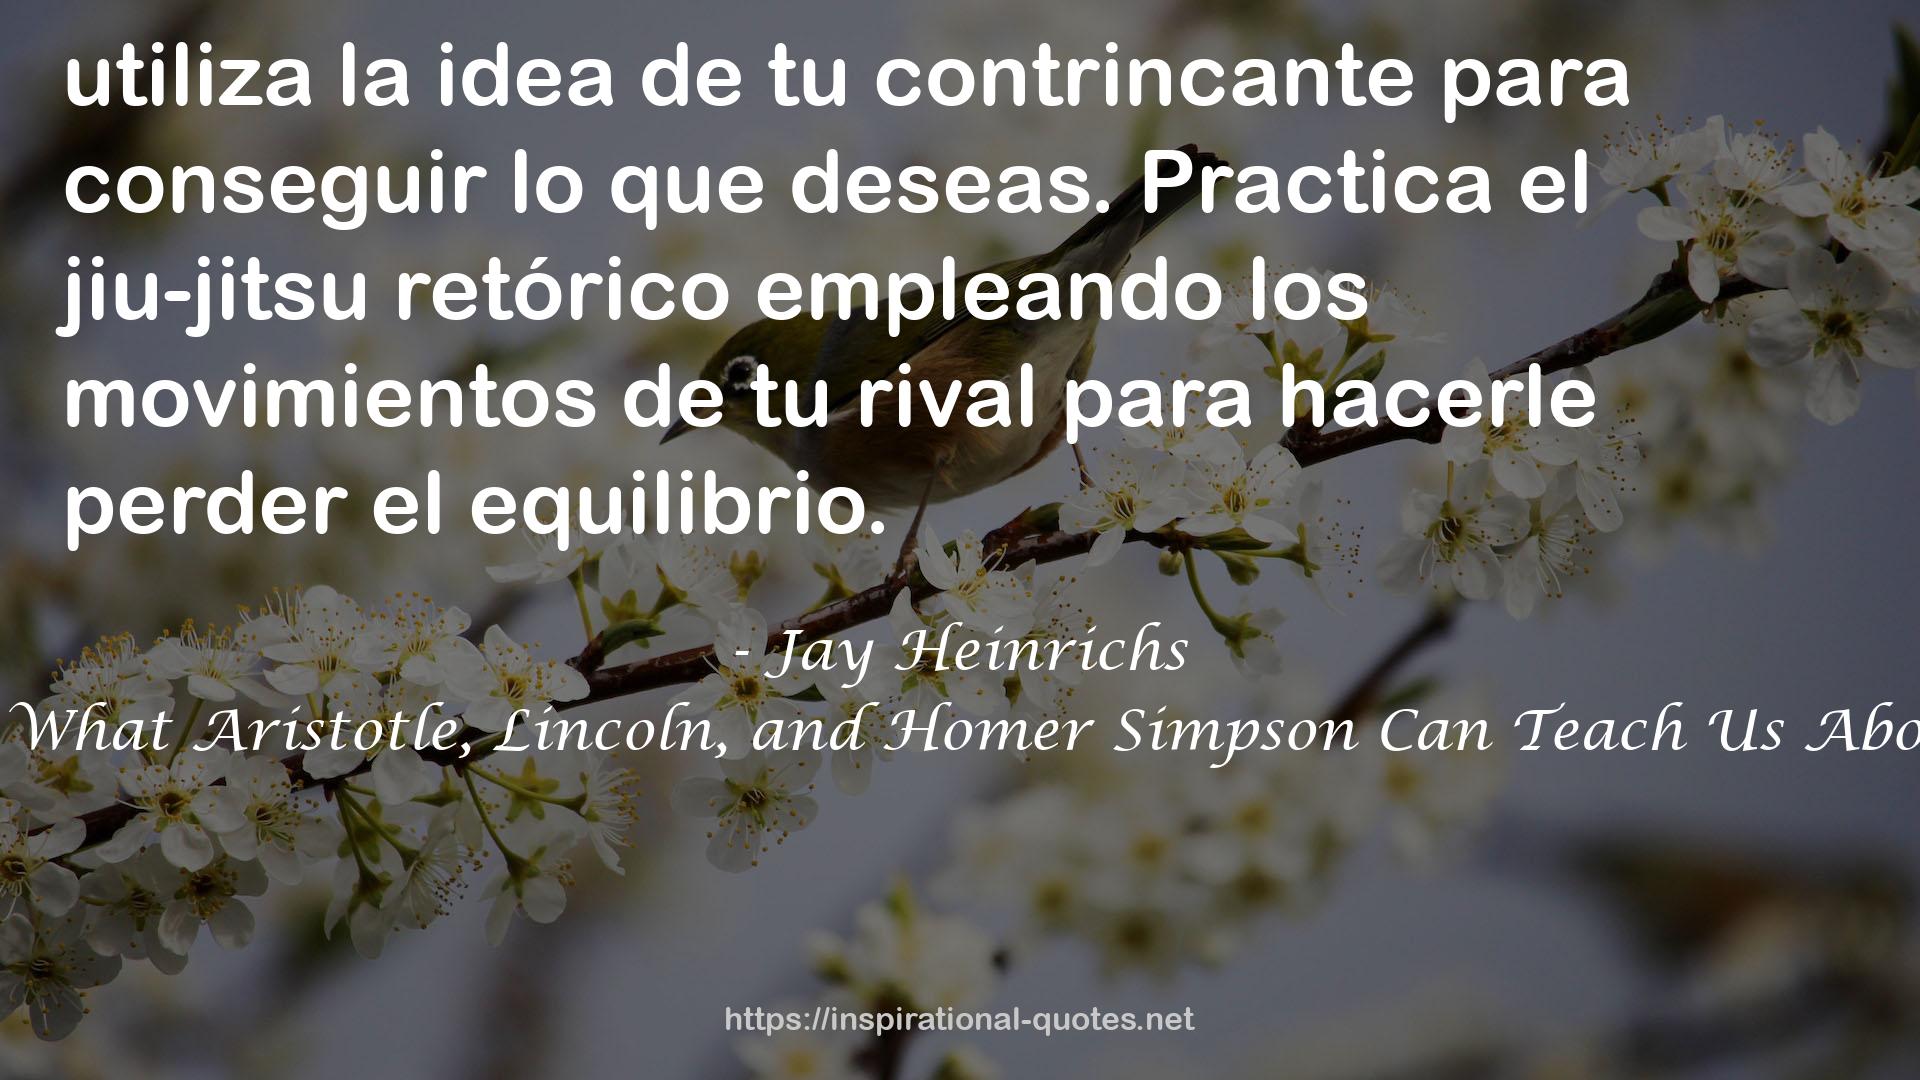 Jay Heinrichs QUOTES